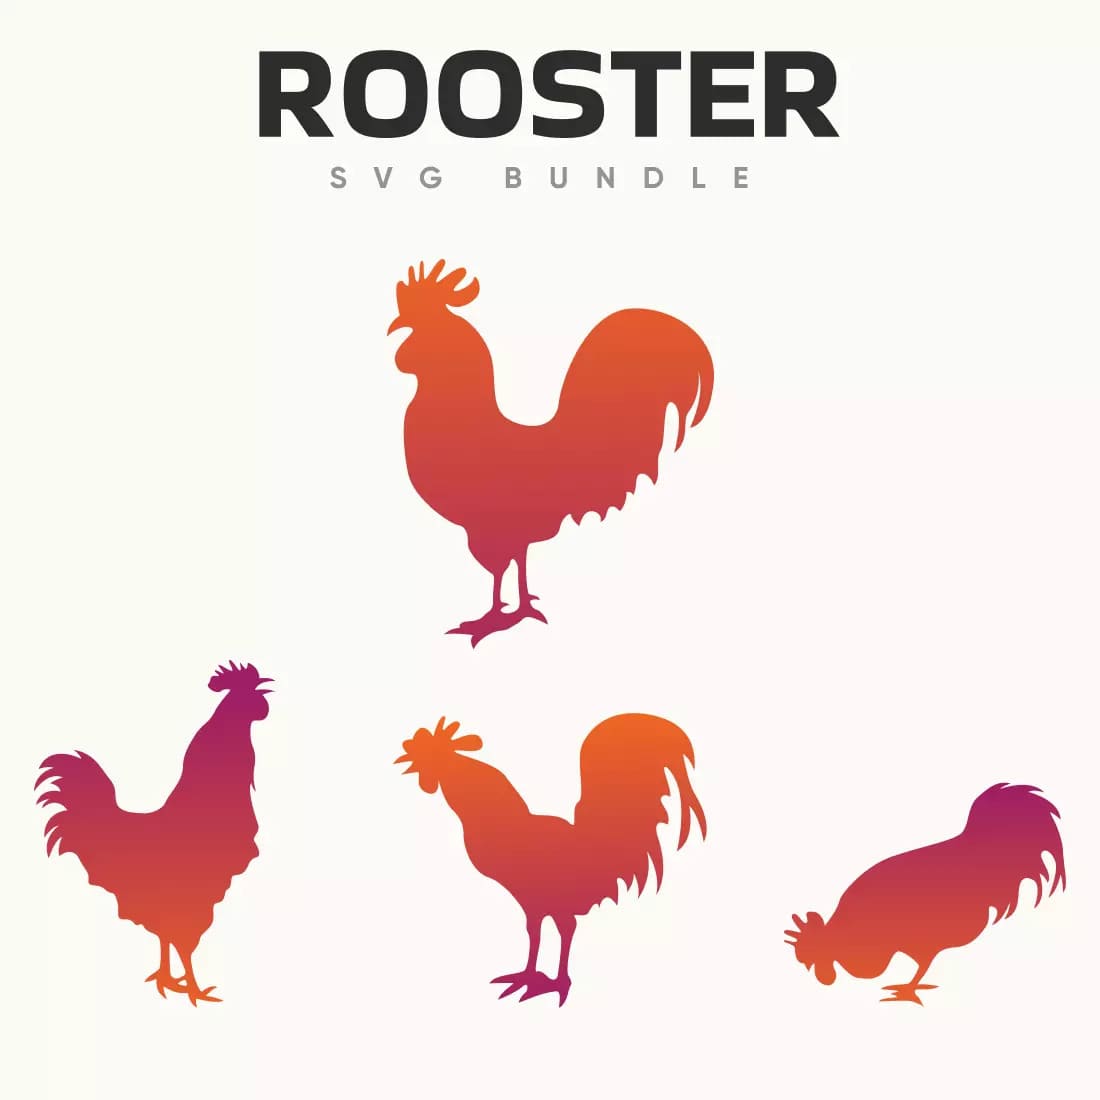 Group of roosters standing next to each other.